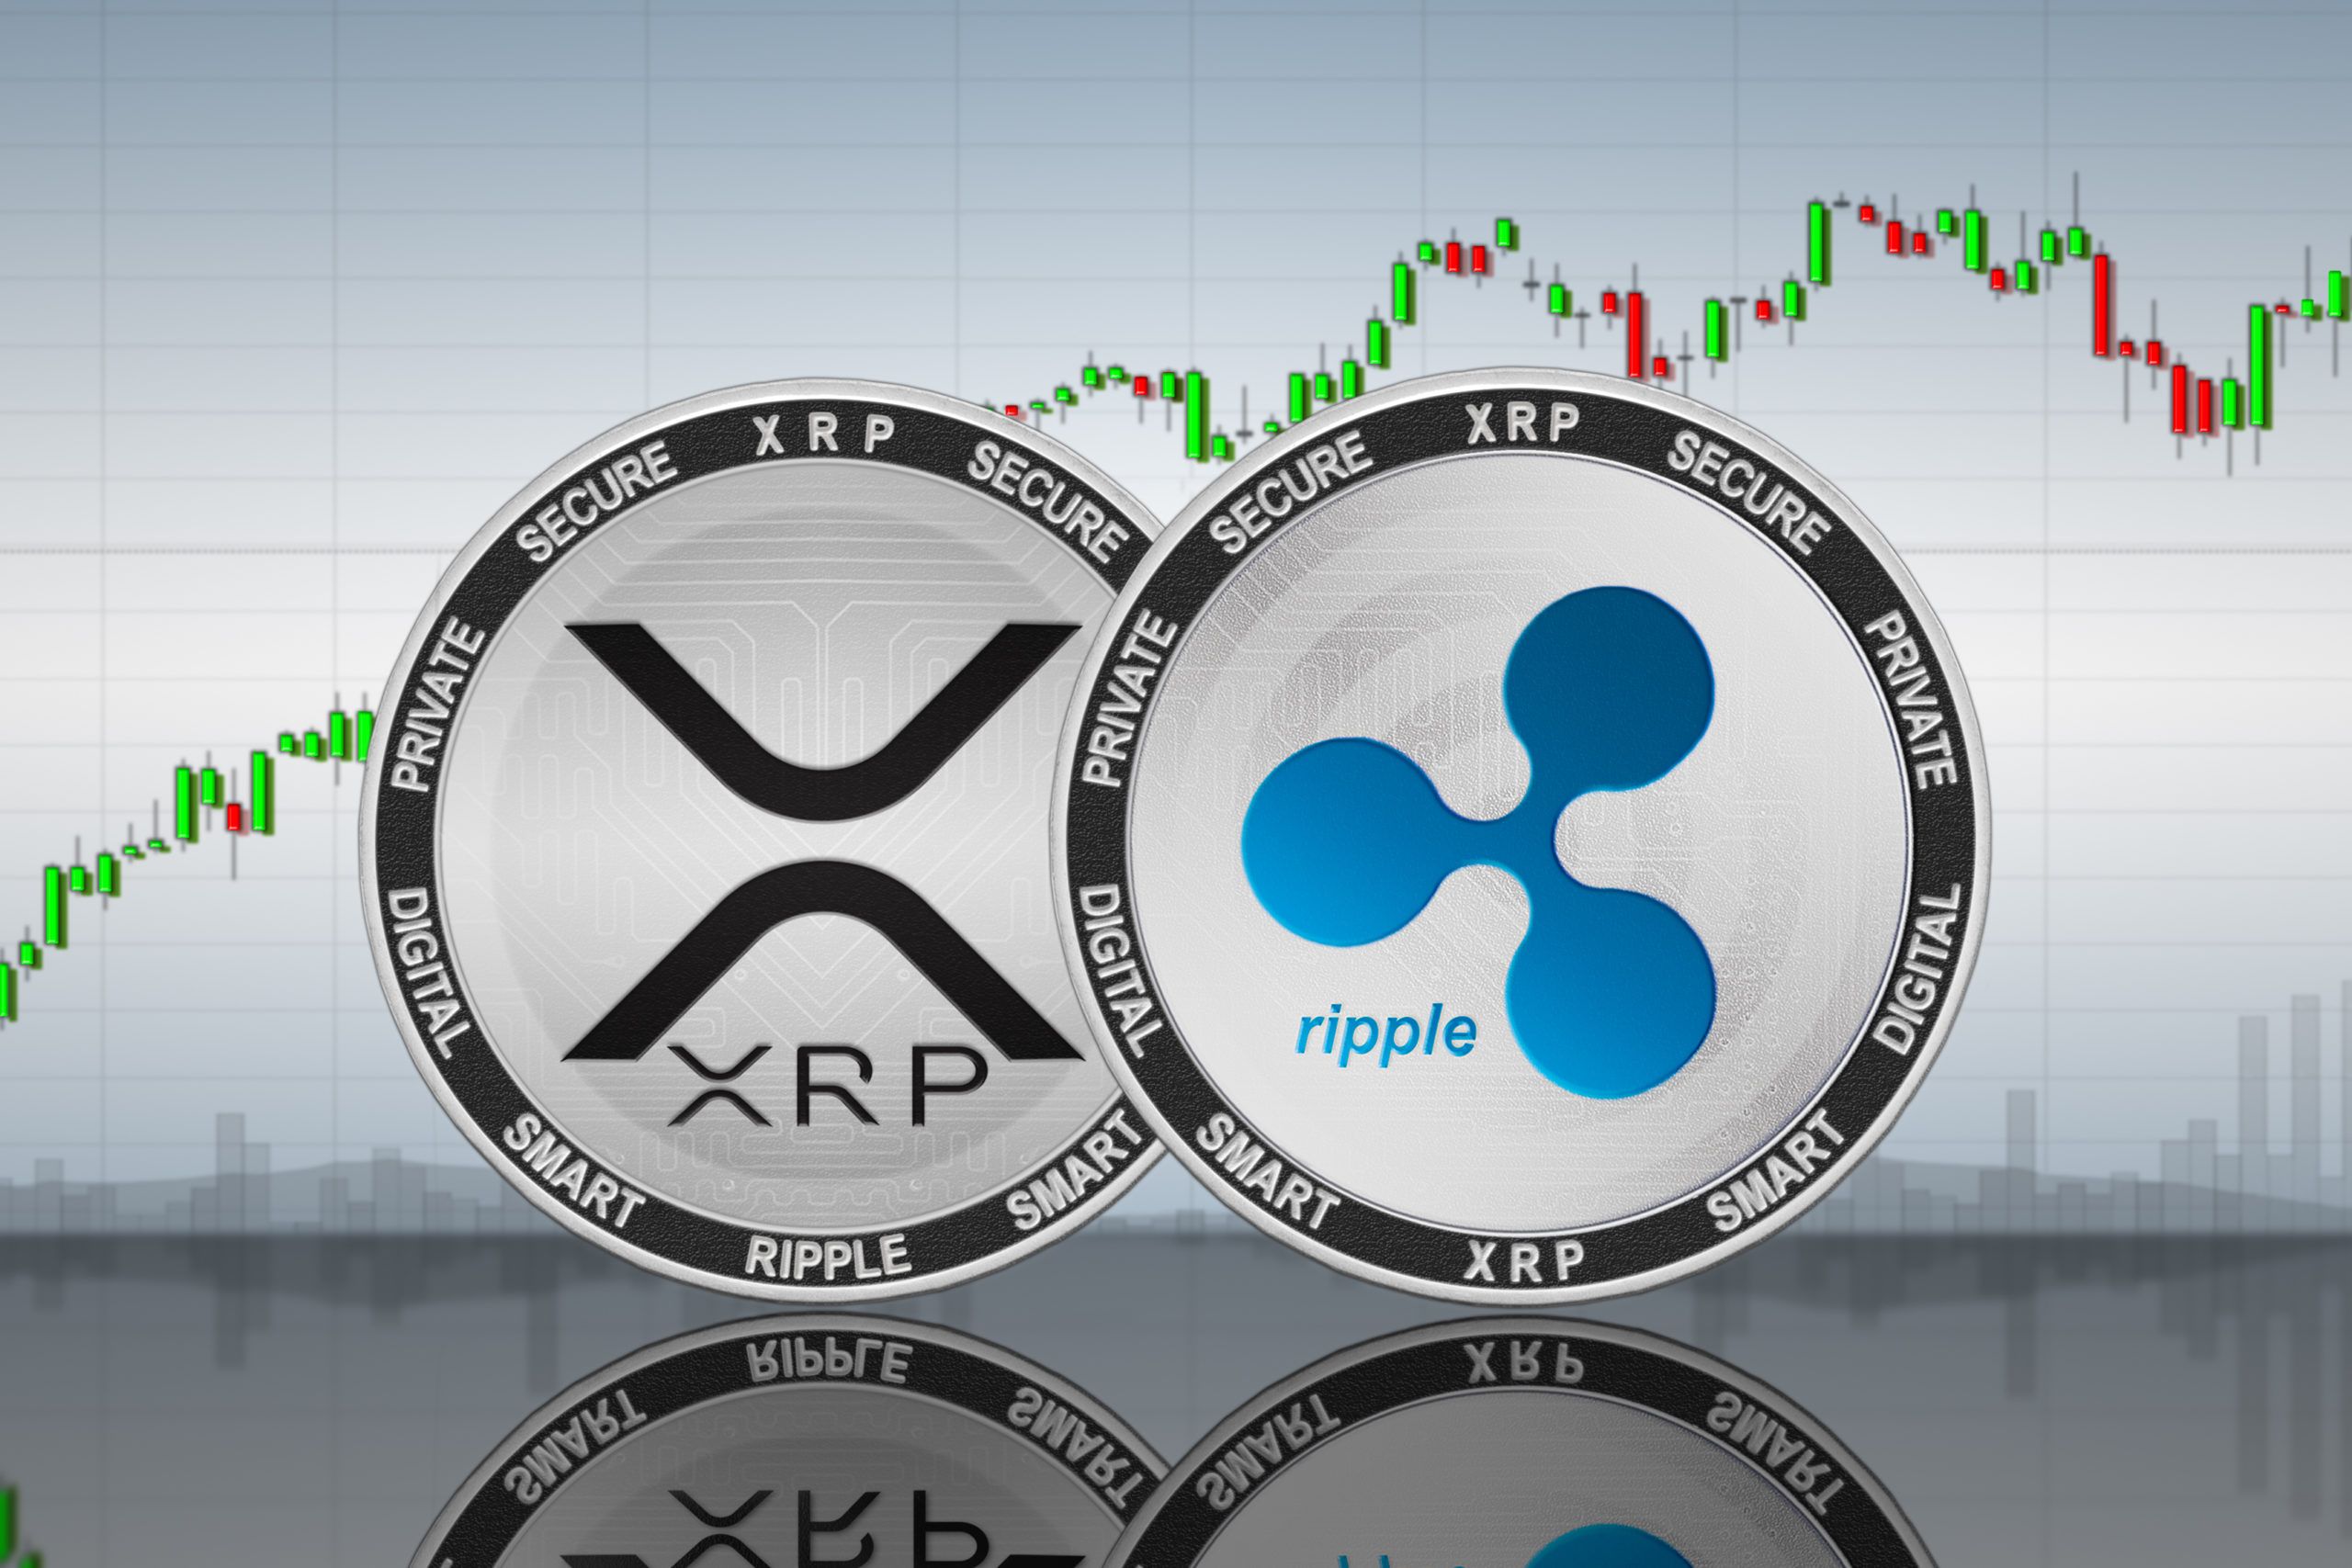  ripple coin system xrp uses called crypto 